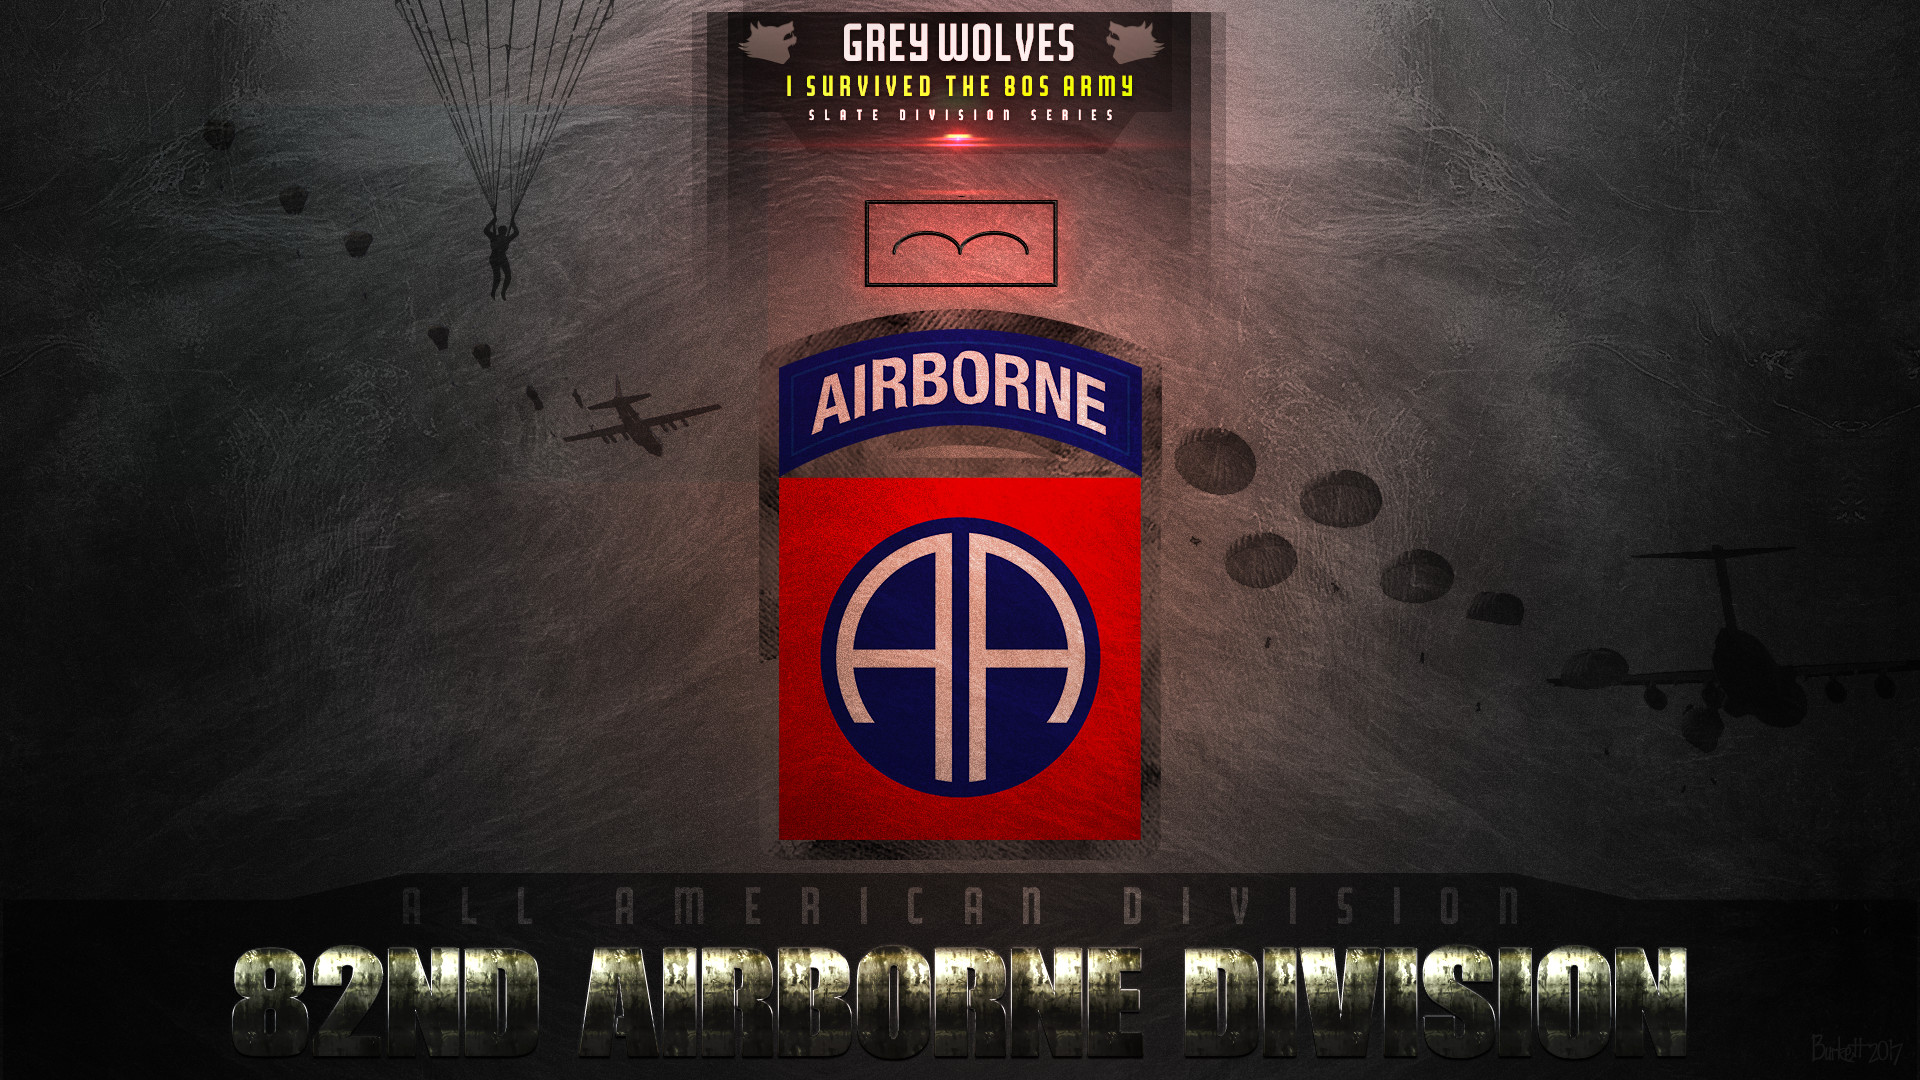 Us Army Airborne Wallpaper Posted By Michelle Peltier